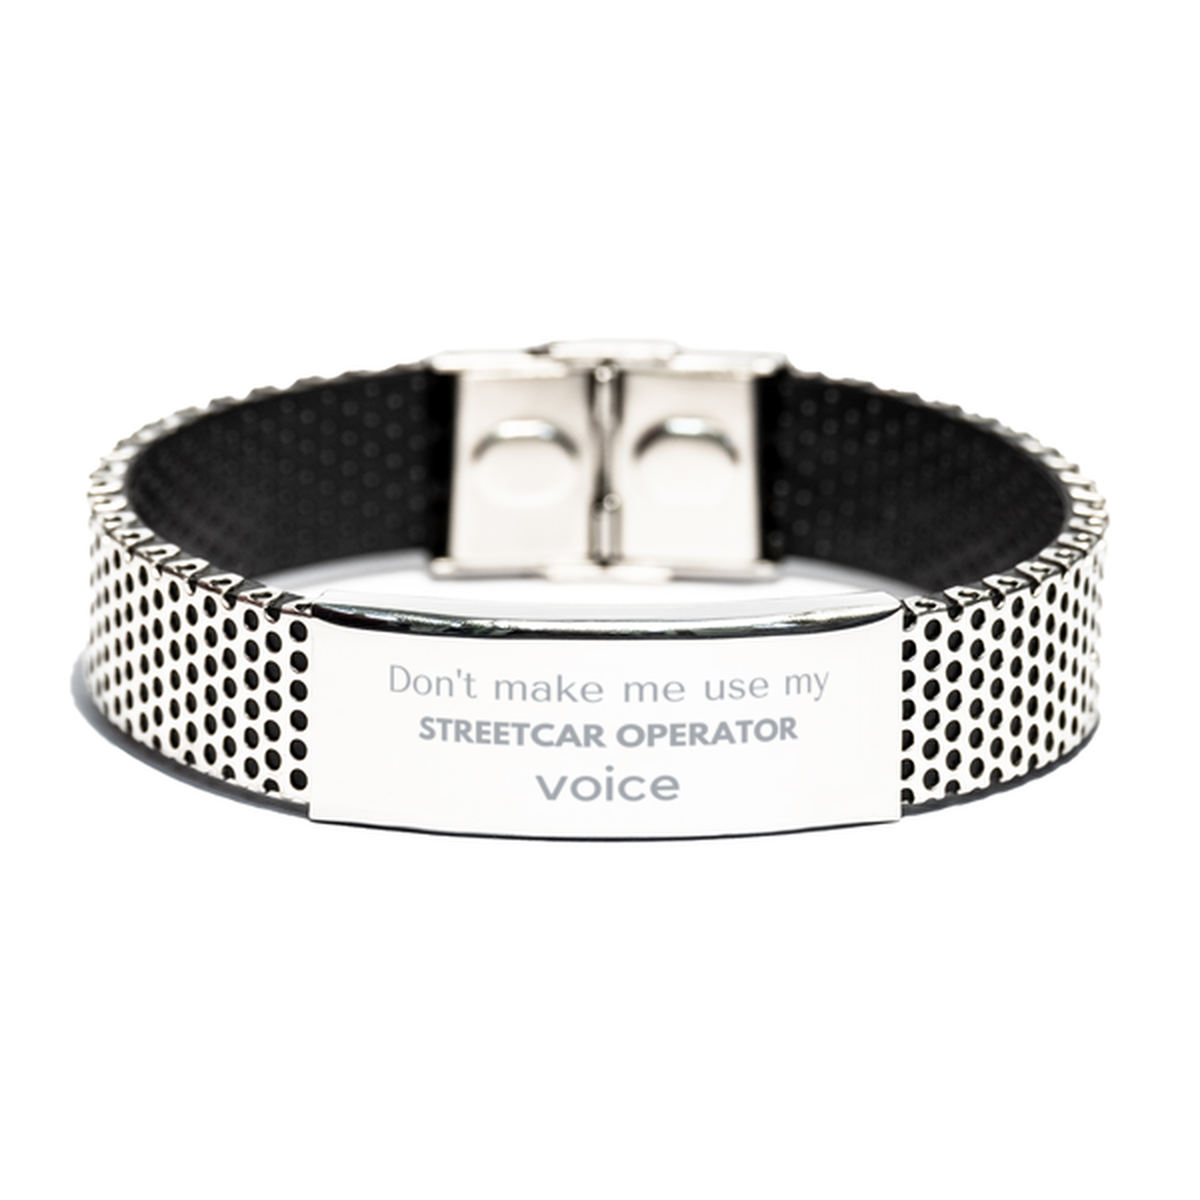 Don't make me use my Streetcar Operator voice, Sarcasm Streetcar Operator Gifts, Christmas Streetcar Operator Stainless Steel Bracelet Birthday Unique Gifts For Streetcar Operator Coworkers, Men, Women, Colleague, Friends